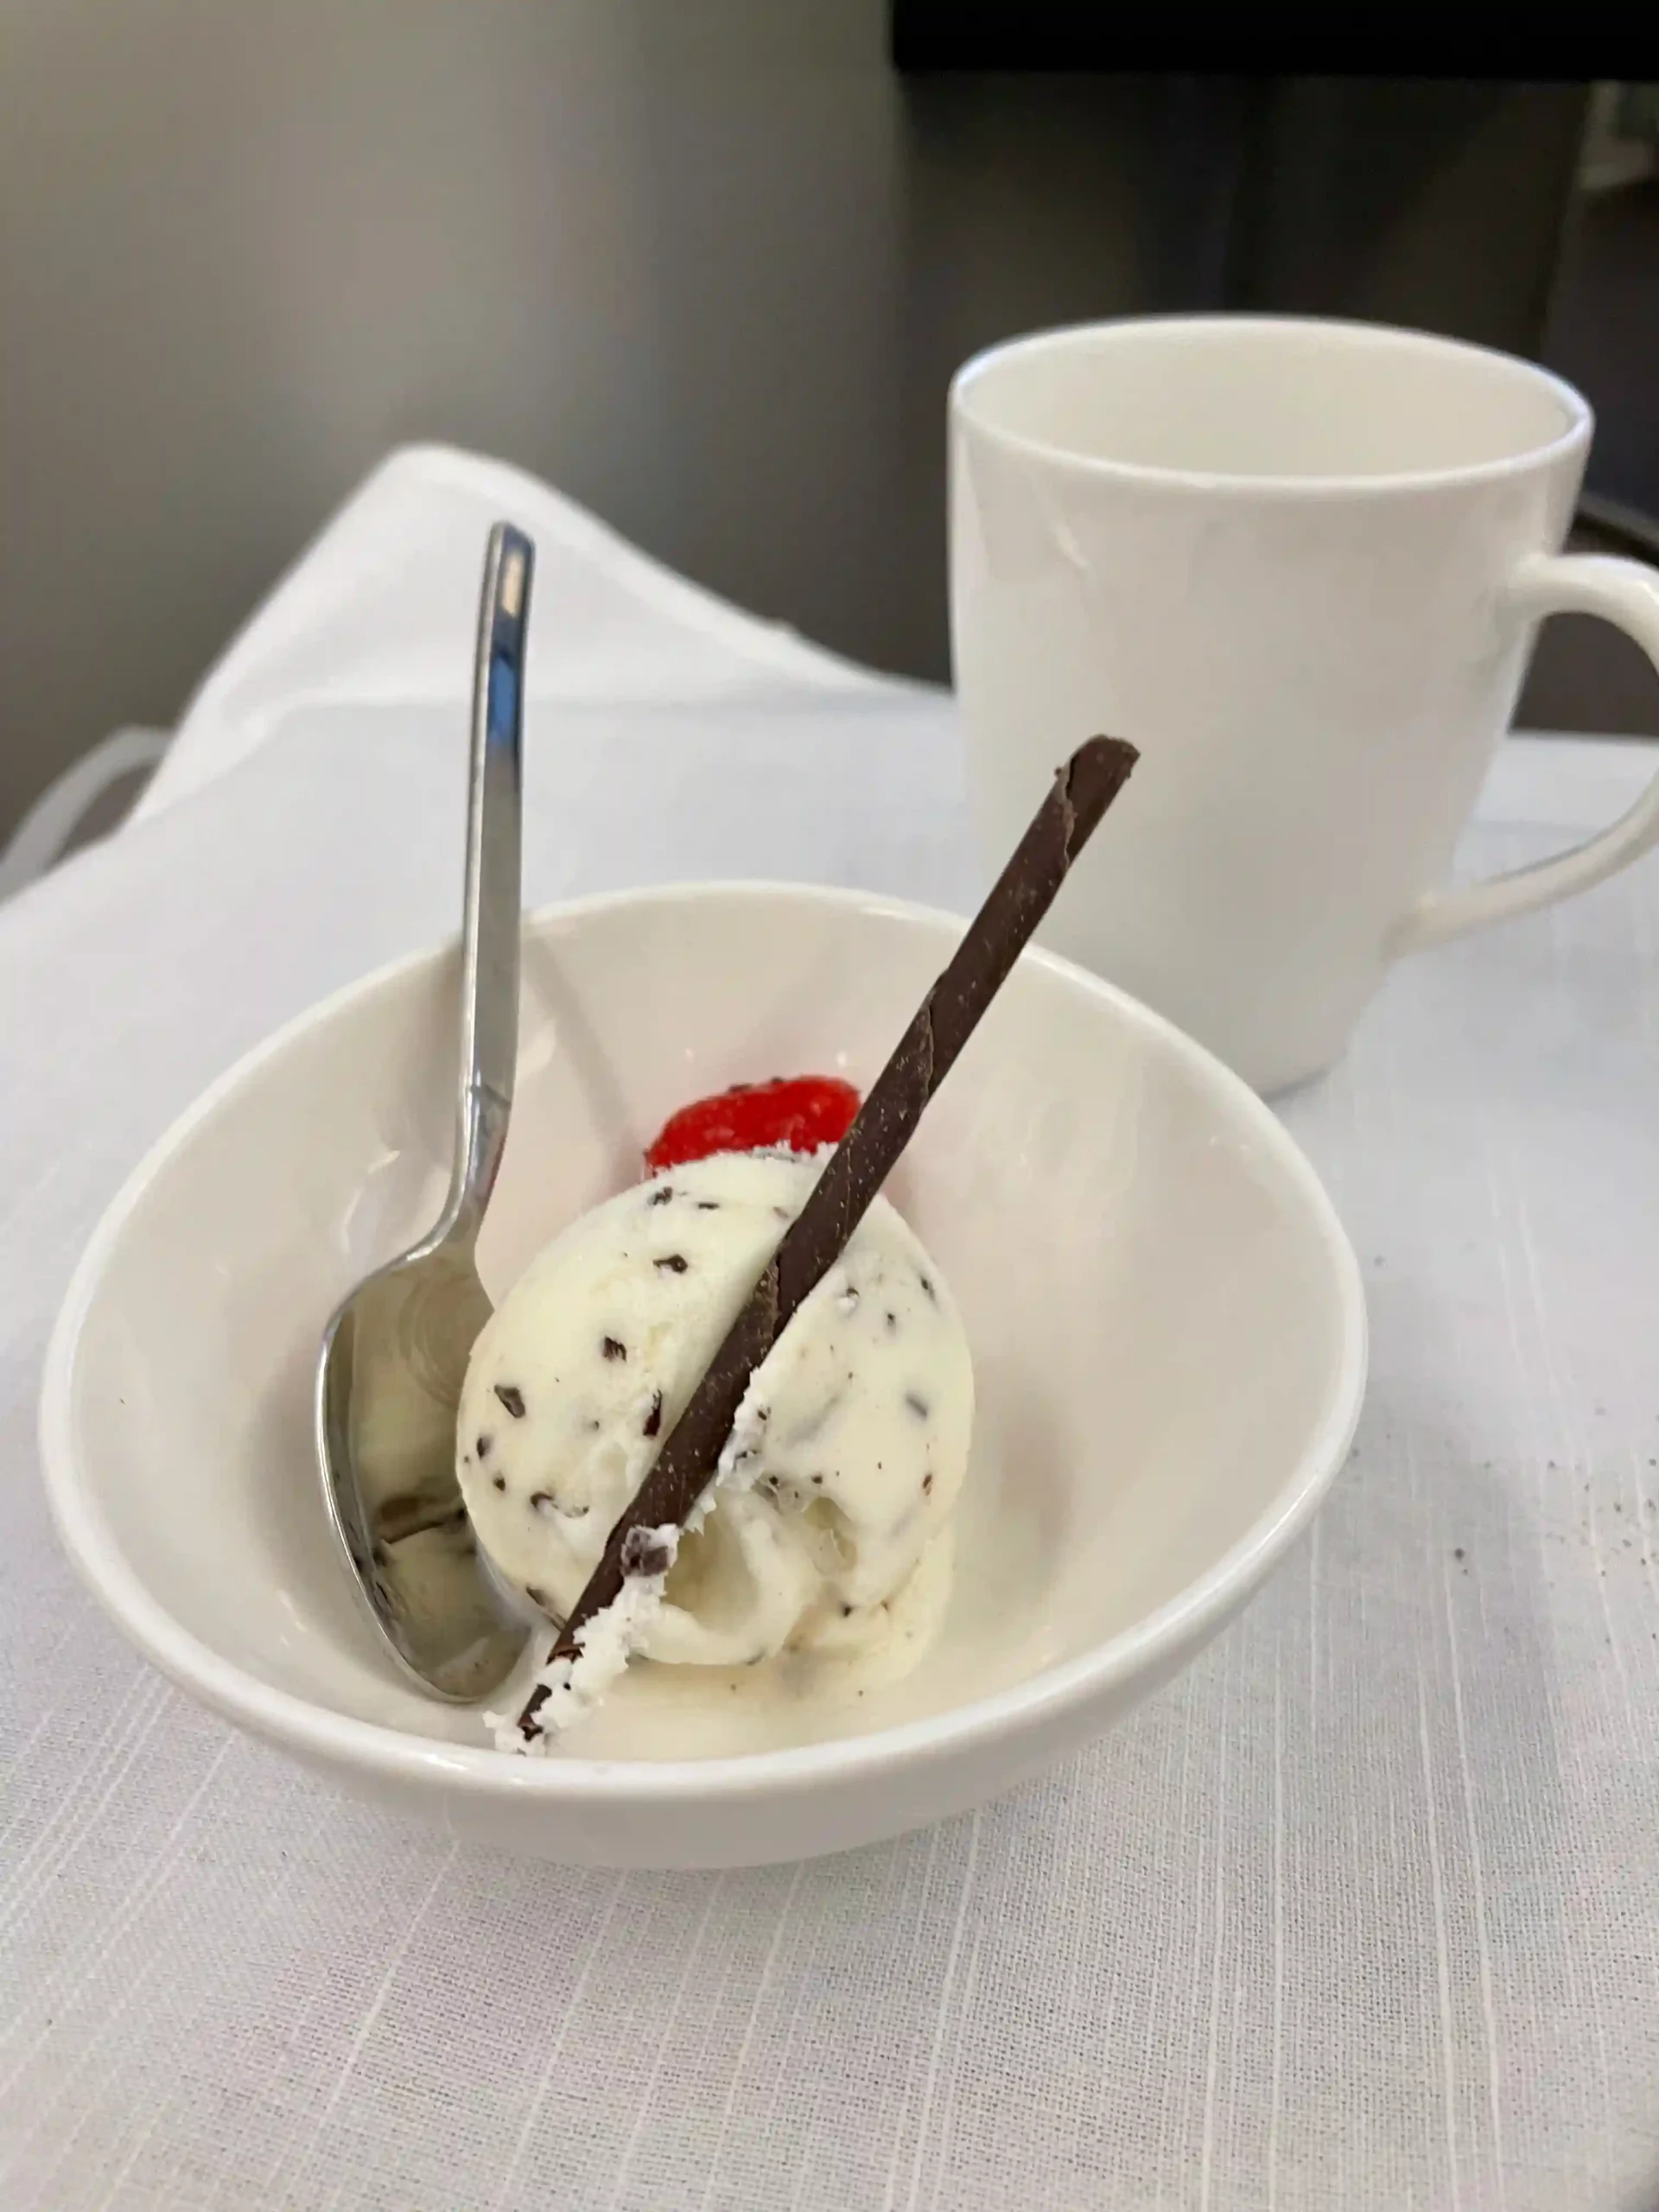 a bowl of ice cream with a spoon and a cup of coffee